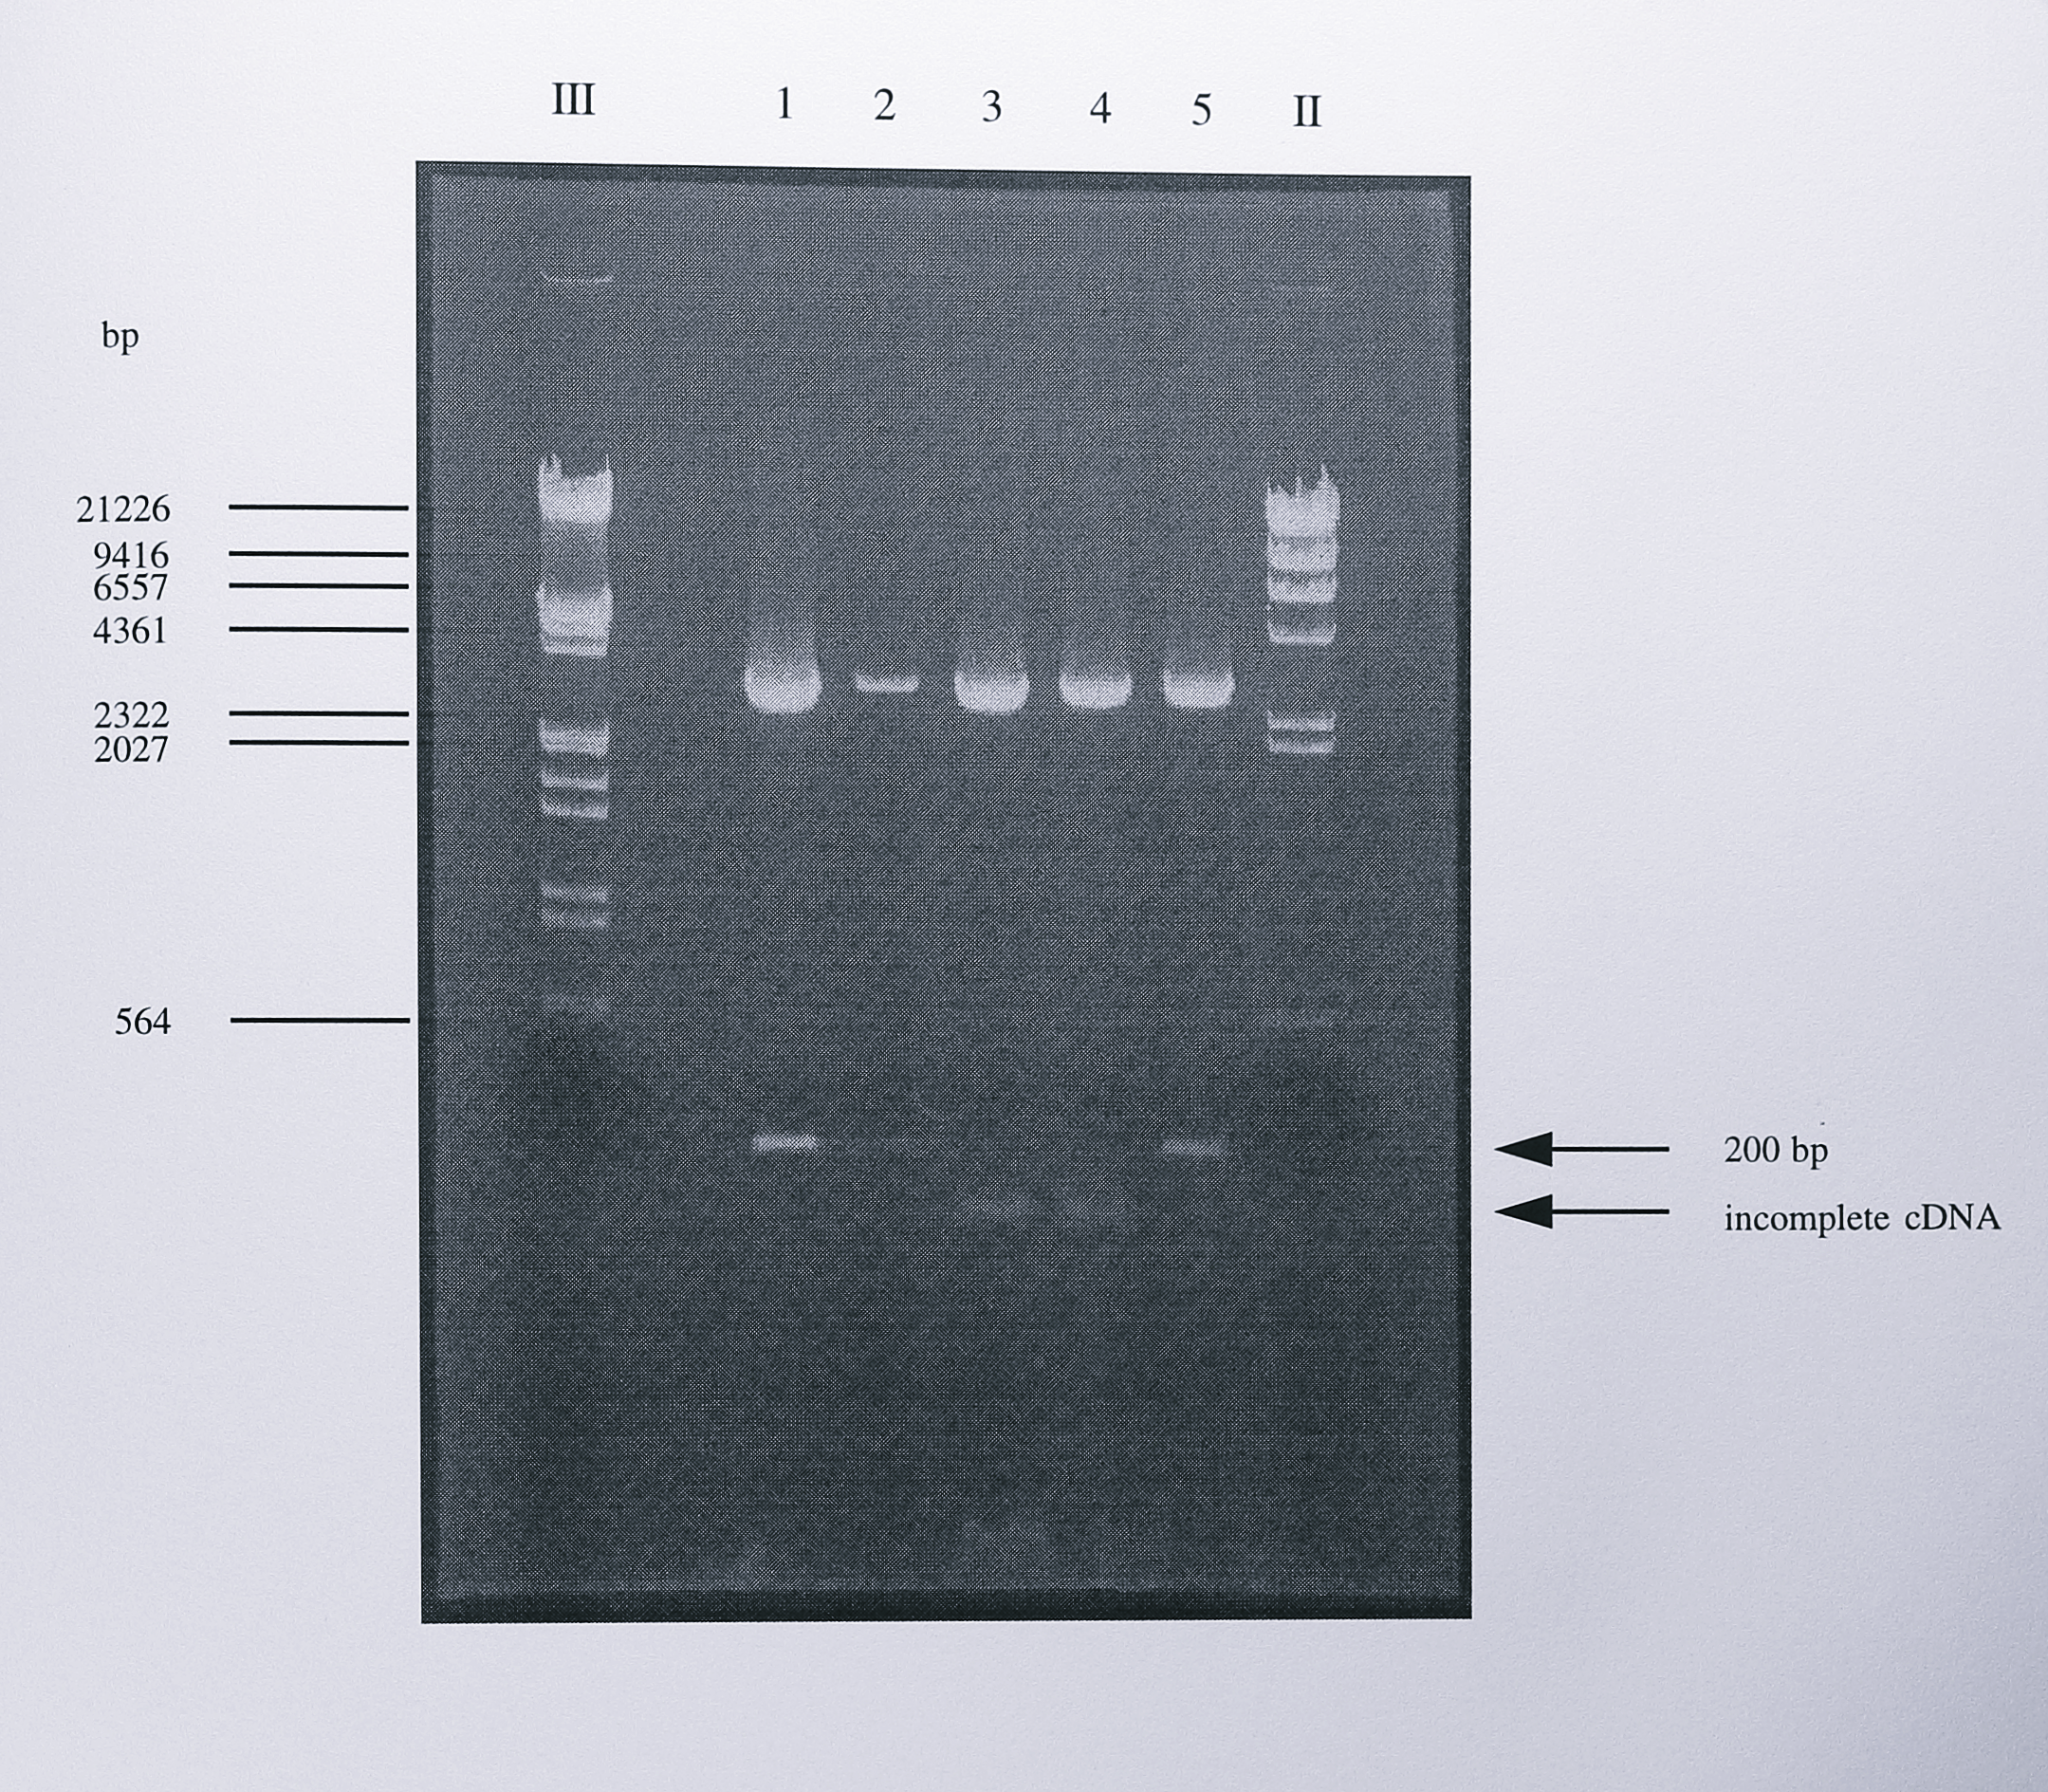 Restriction digest analysis of the cloned PCR products generated from _nirS_ mRNA by 5'-RACE. The 200 bp PCR product generated by PCR using the primers Q1F and 284R (Figure 7.8) was cloned into the T-vector pGEM-T. Following blue-white selection, positive clones were digested using the enzymes _SphI_ and _NdeI_. These enzymes cut once each side of the multiple cloning site but not in the _nirS_ gene sequence and therefore were a good screen for the presence of a cloned insert. Three of the clones (lanes 1, 2 and 5) contained the expected 200 bp insert. the other clones (lanes 3 and 4) contained a smaller insert. Sequencing of the latter clones showed that the smaller insert originated in the coding region of the _nirS_ gene and therefore resulted for incomplete cDNA synthesis during 5'-RACE. The lanes labelled III and II contained DNA size standards, some of which are indicated to of the gel.